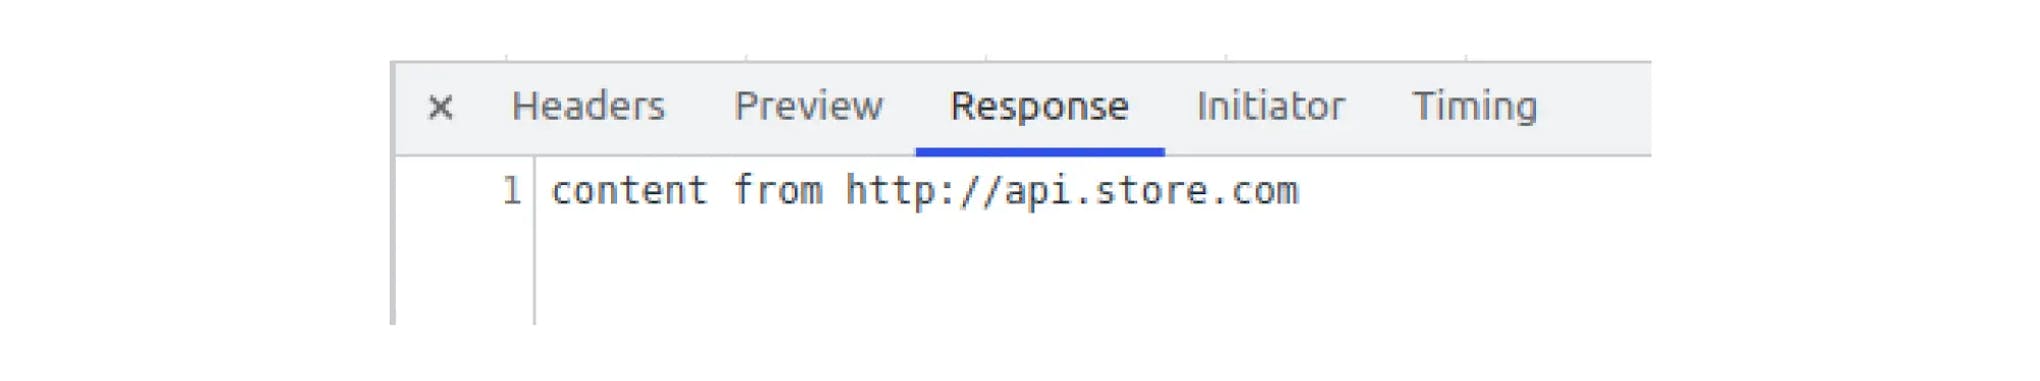 Response Tab in the Browser Console